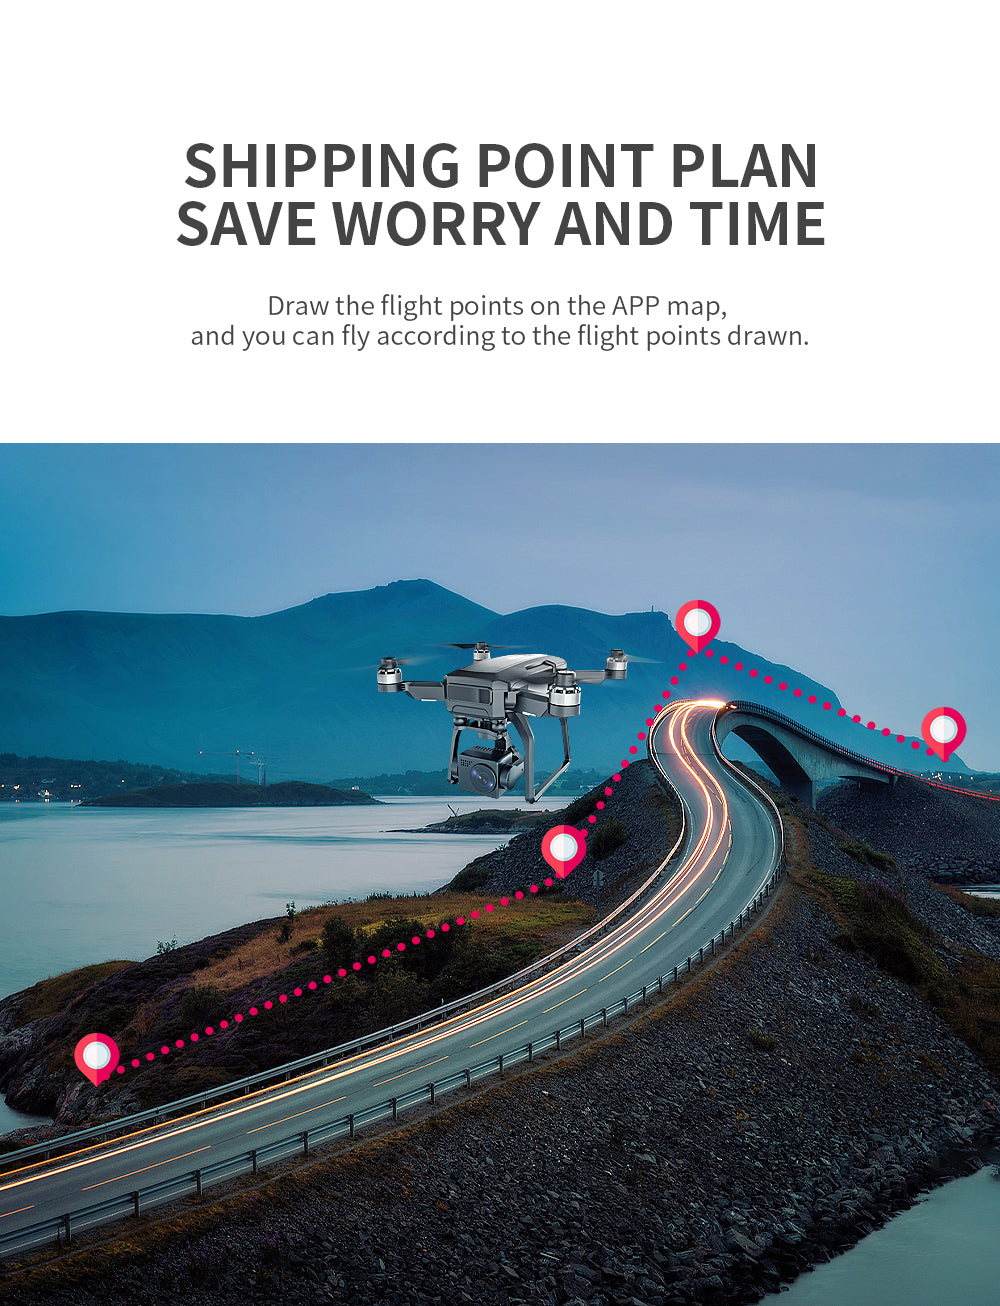 SJRC F7 PRO / F7S Pro Drone, draw the flight points on the APP map, and you can fly according to the drawn flight